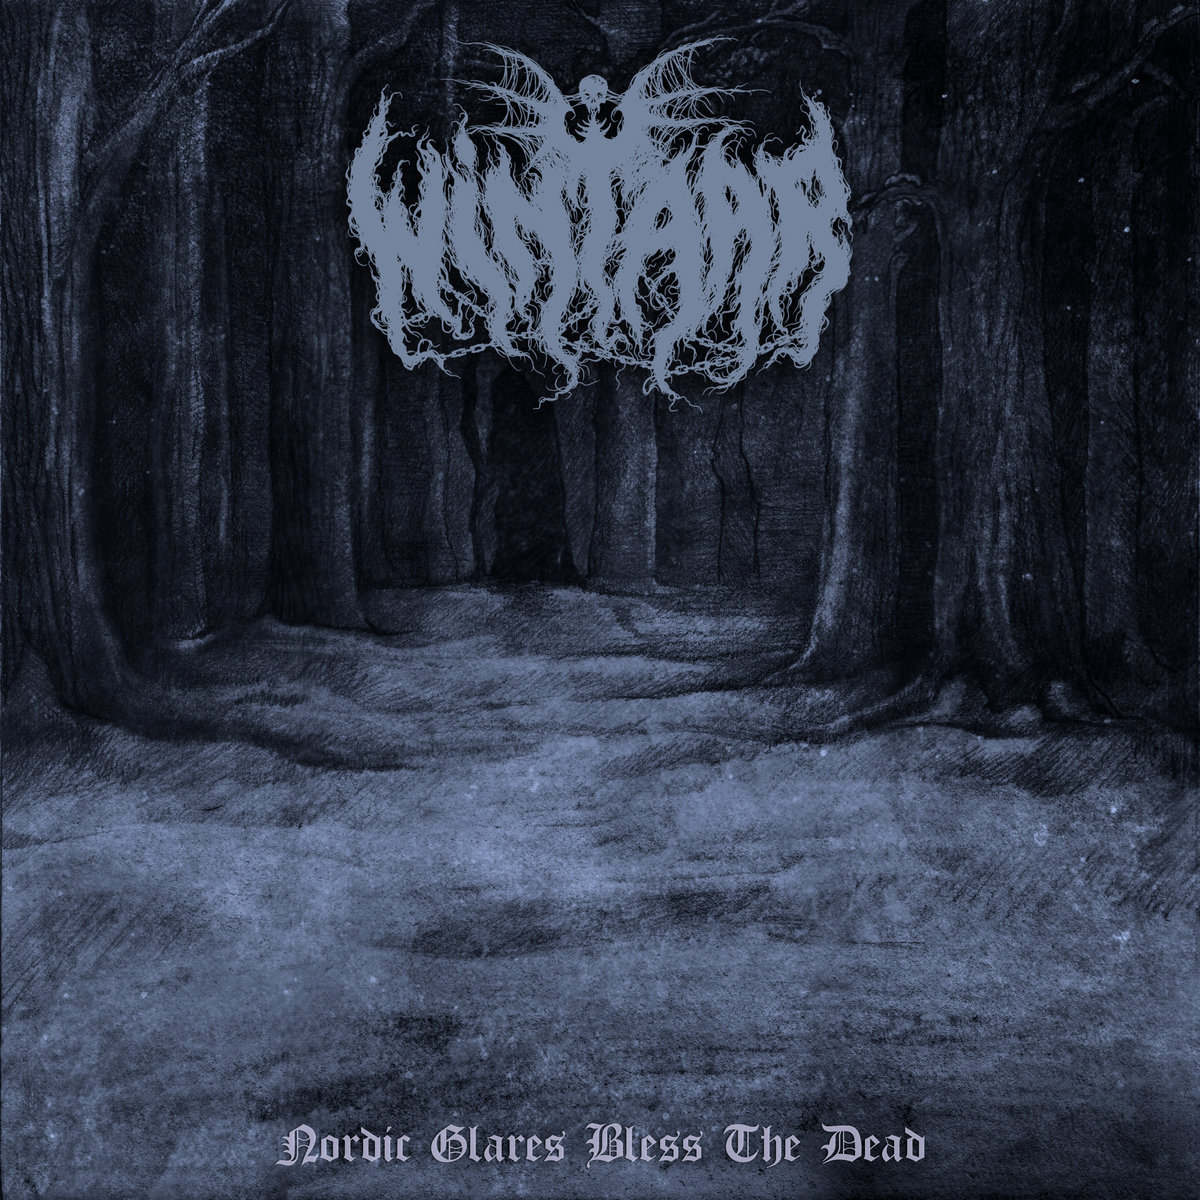 WINTAAR - Nordic Glares Bless the Dead cover 